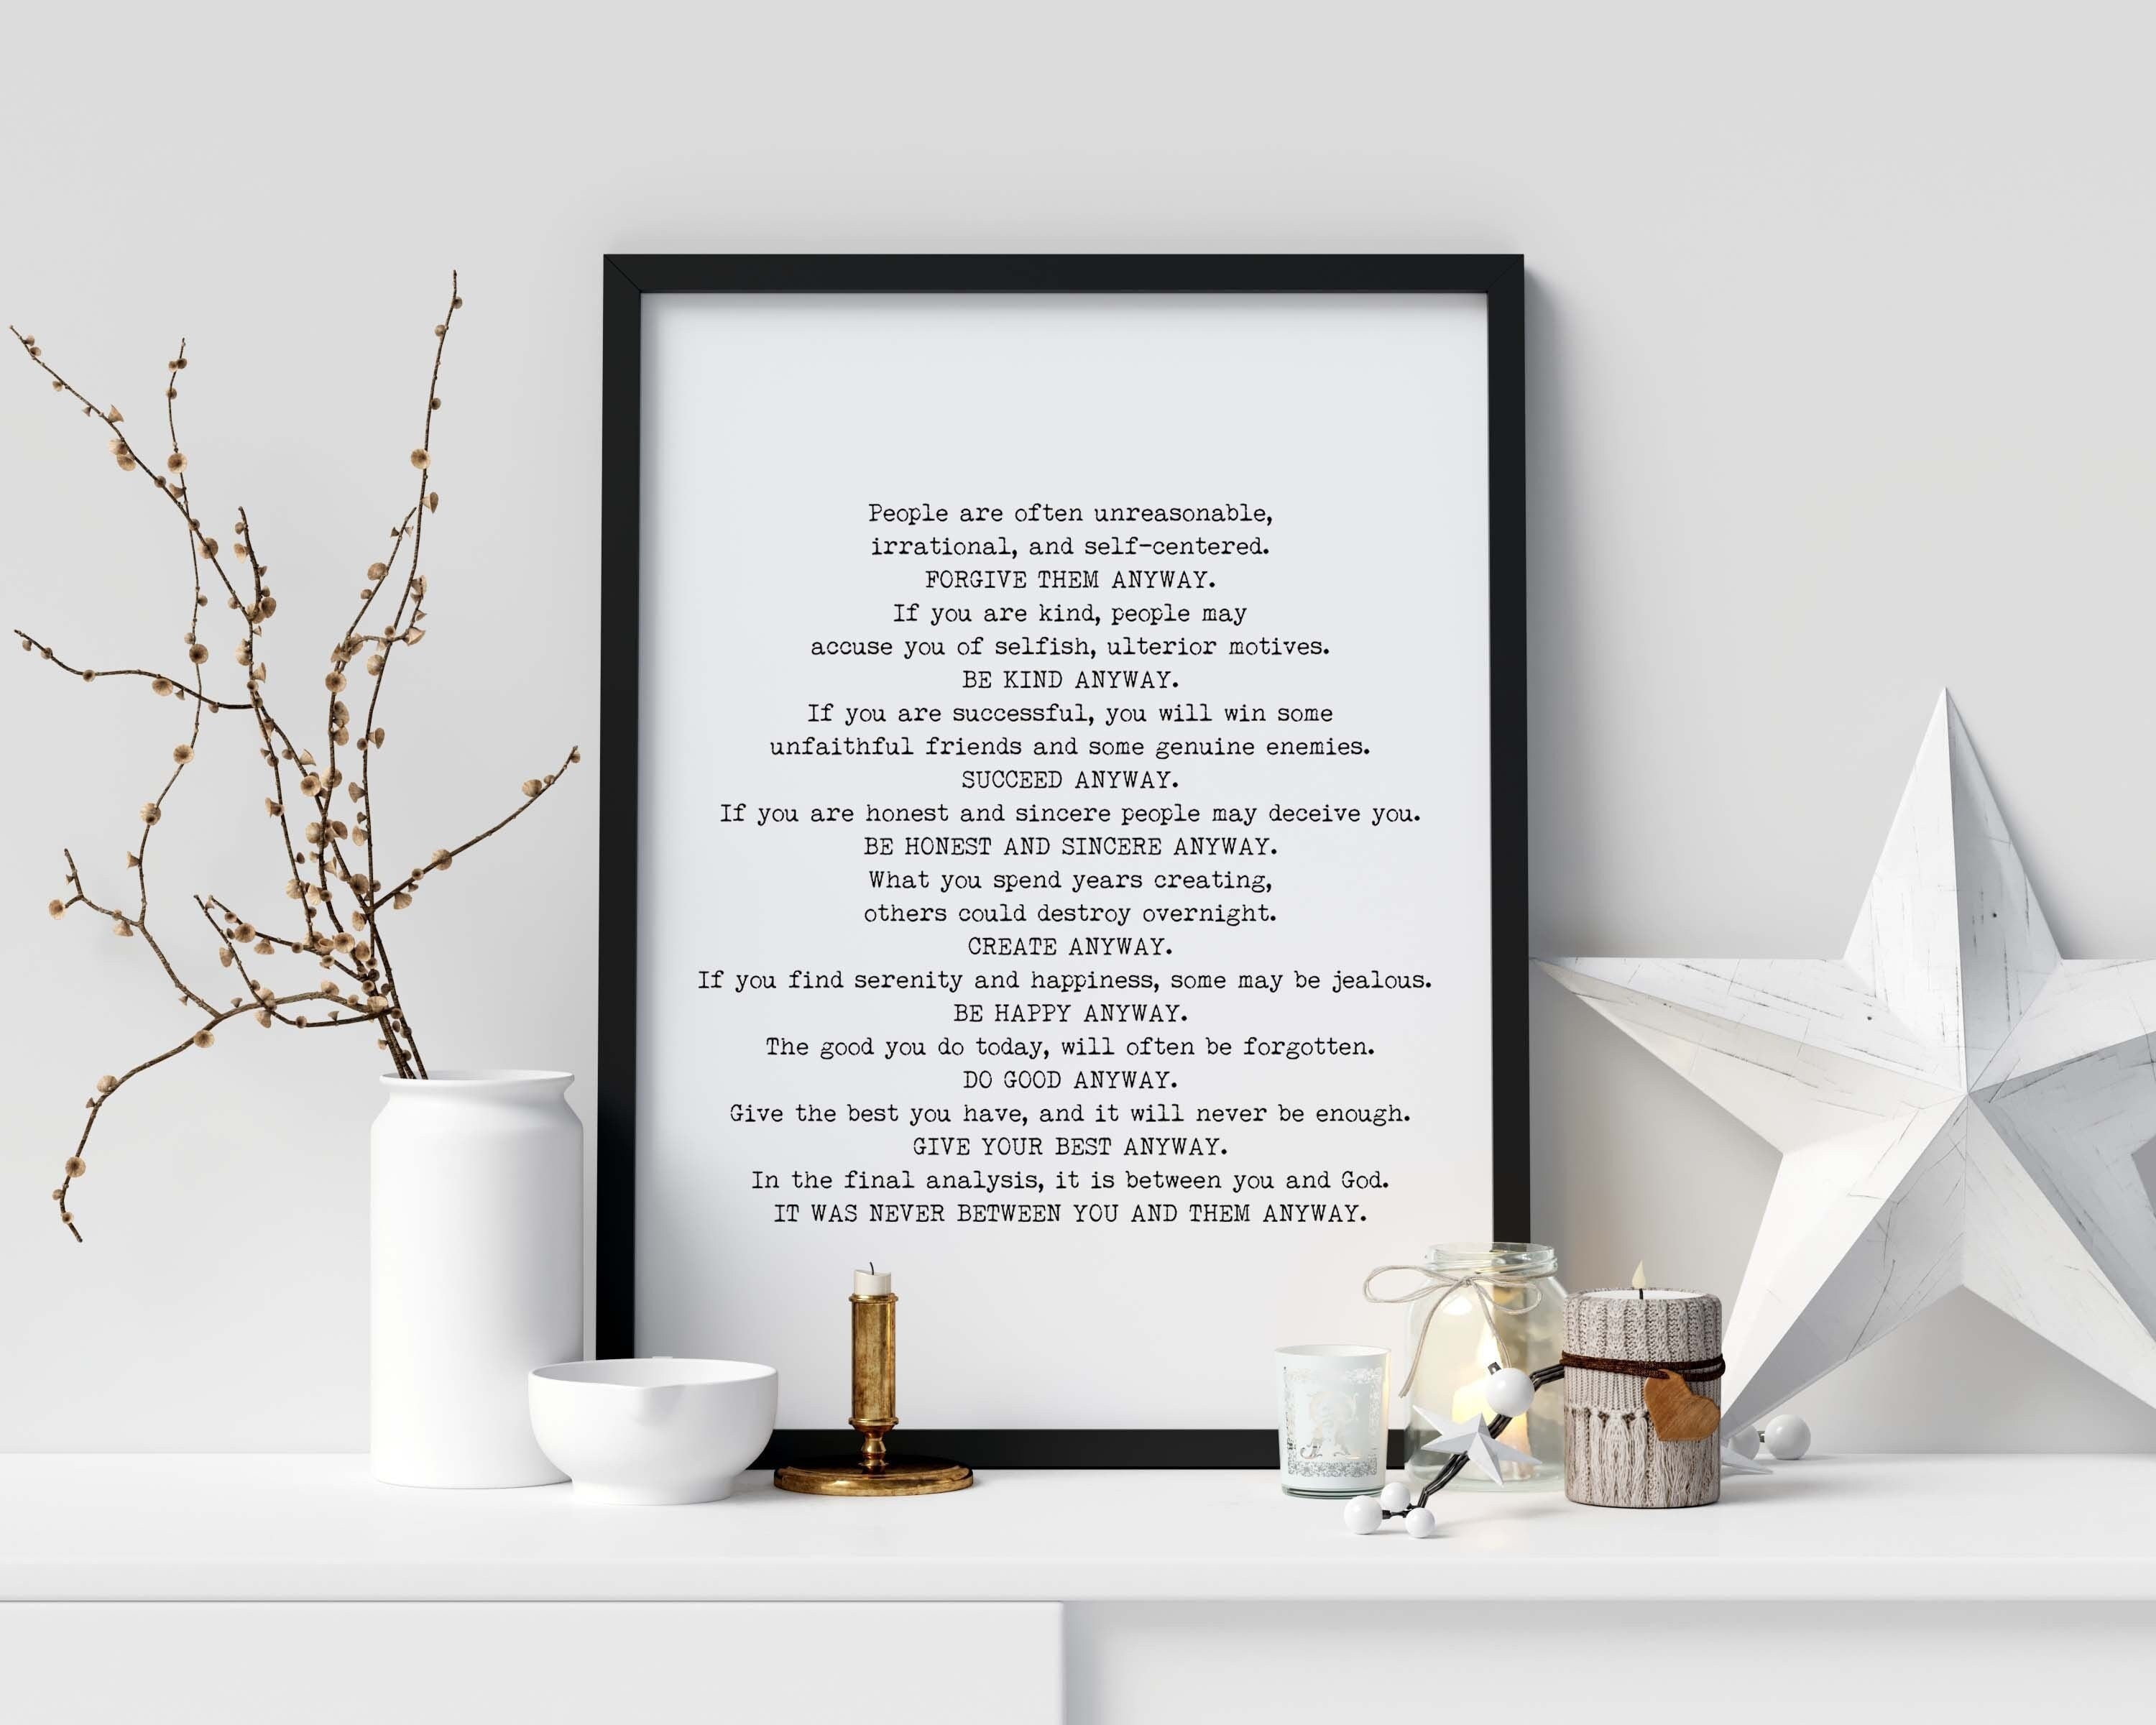 Mother Teresa Quote Poem Framed Art Do It Anyway Framed Black & White Inspirational Wall Art Print, Paradoxical Commandments Christian Gifts